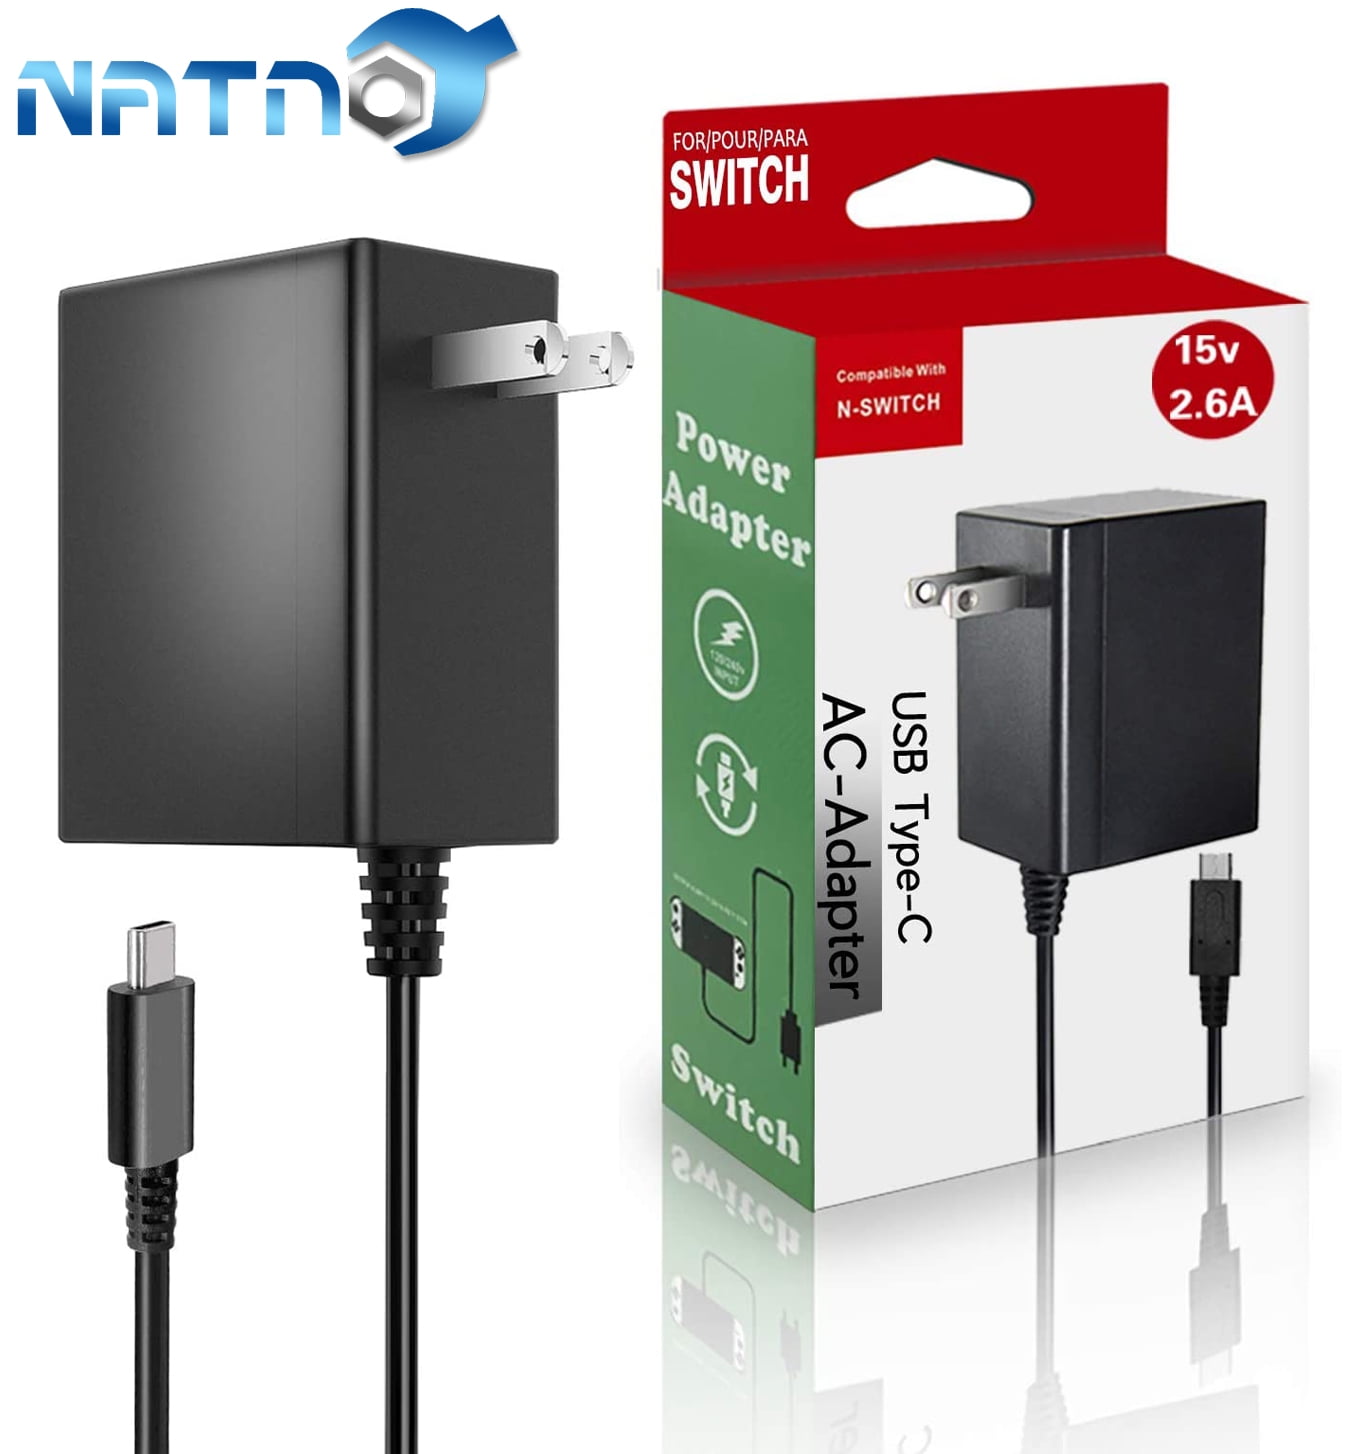 Omleiding leg uit Ananiver AC Adapter Charger for Nintendo Switch, NATNO Switch Charger AC Adapter  Power Supply 15V 2.6A Fast Charging Kit for Switch Dock /Switch Lite and  Pro Controller (Support TV Mode),Black - Walmart.com